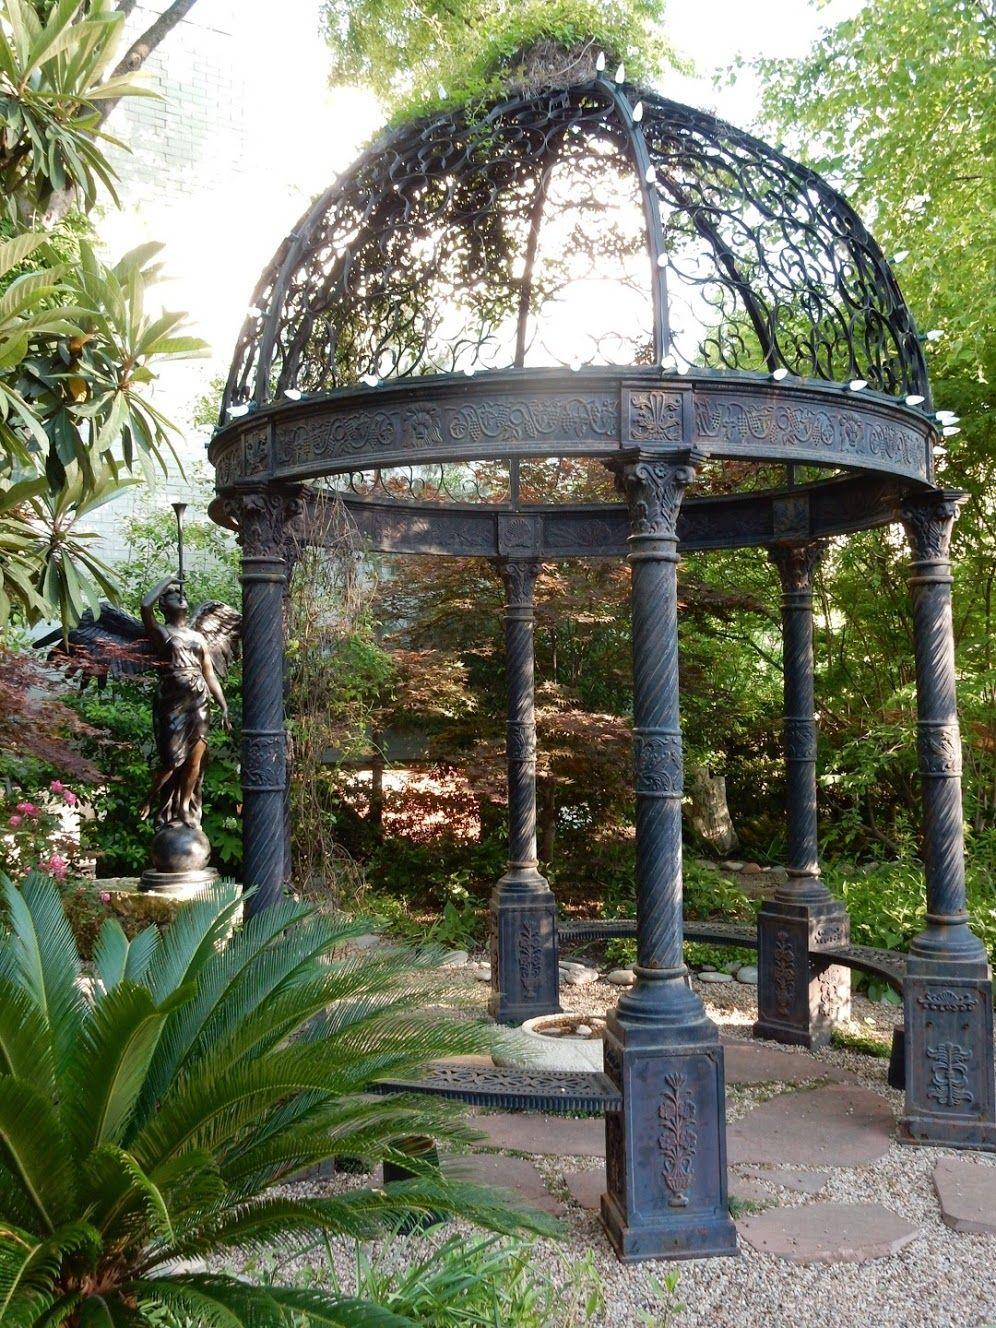 A gazebo with an angel statue next to it.